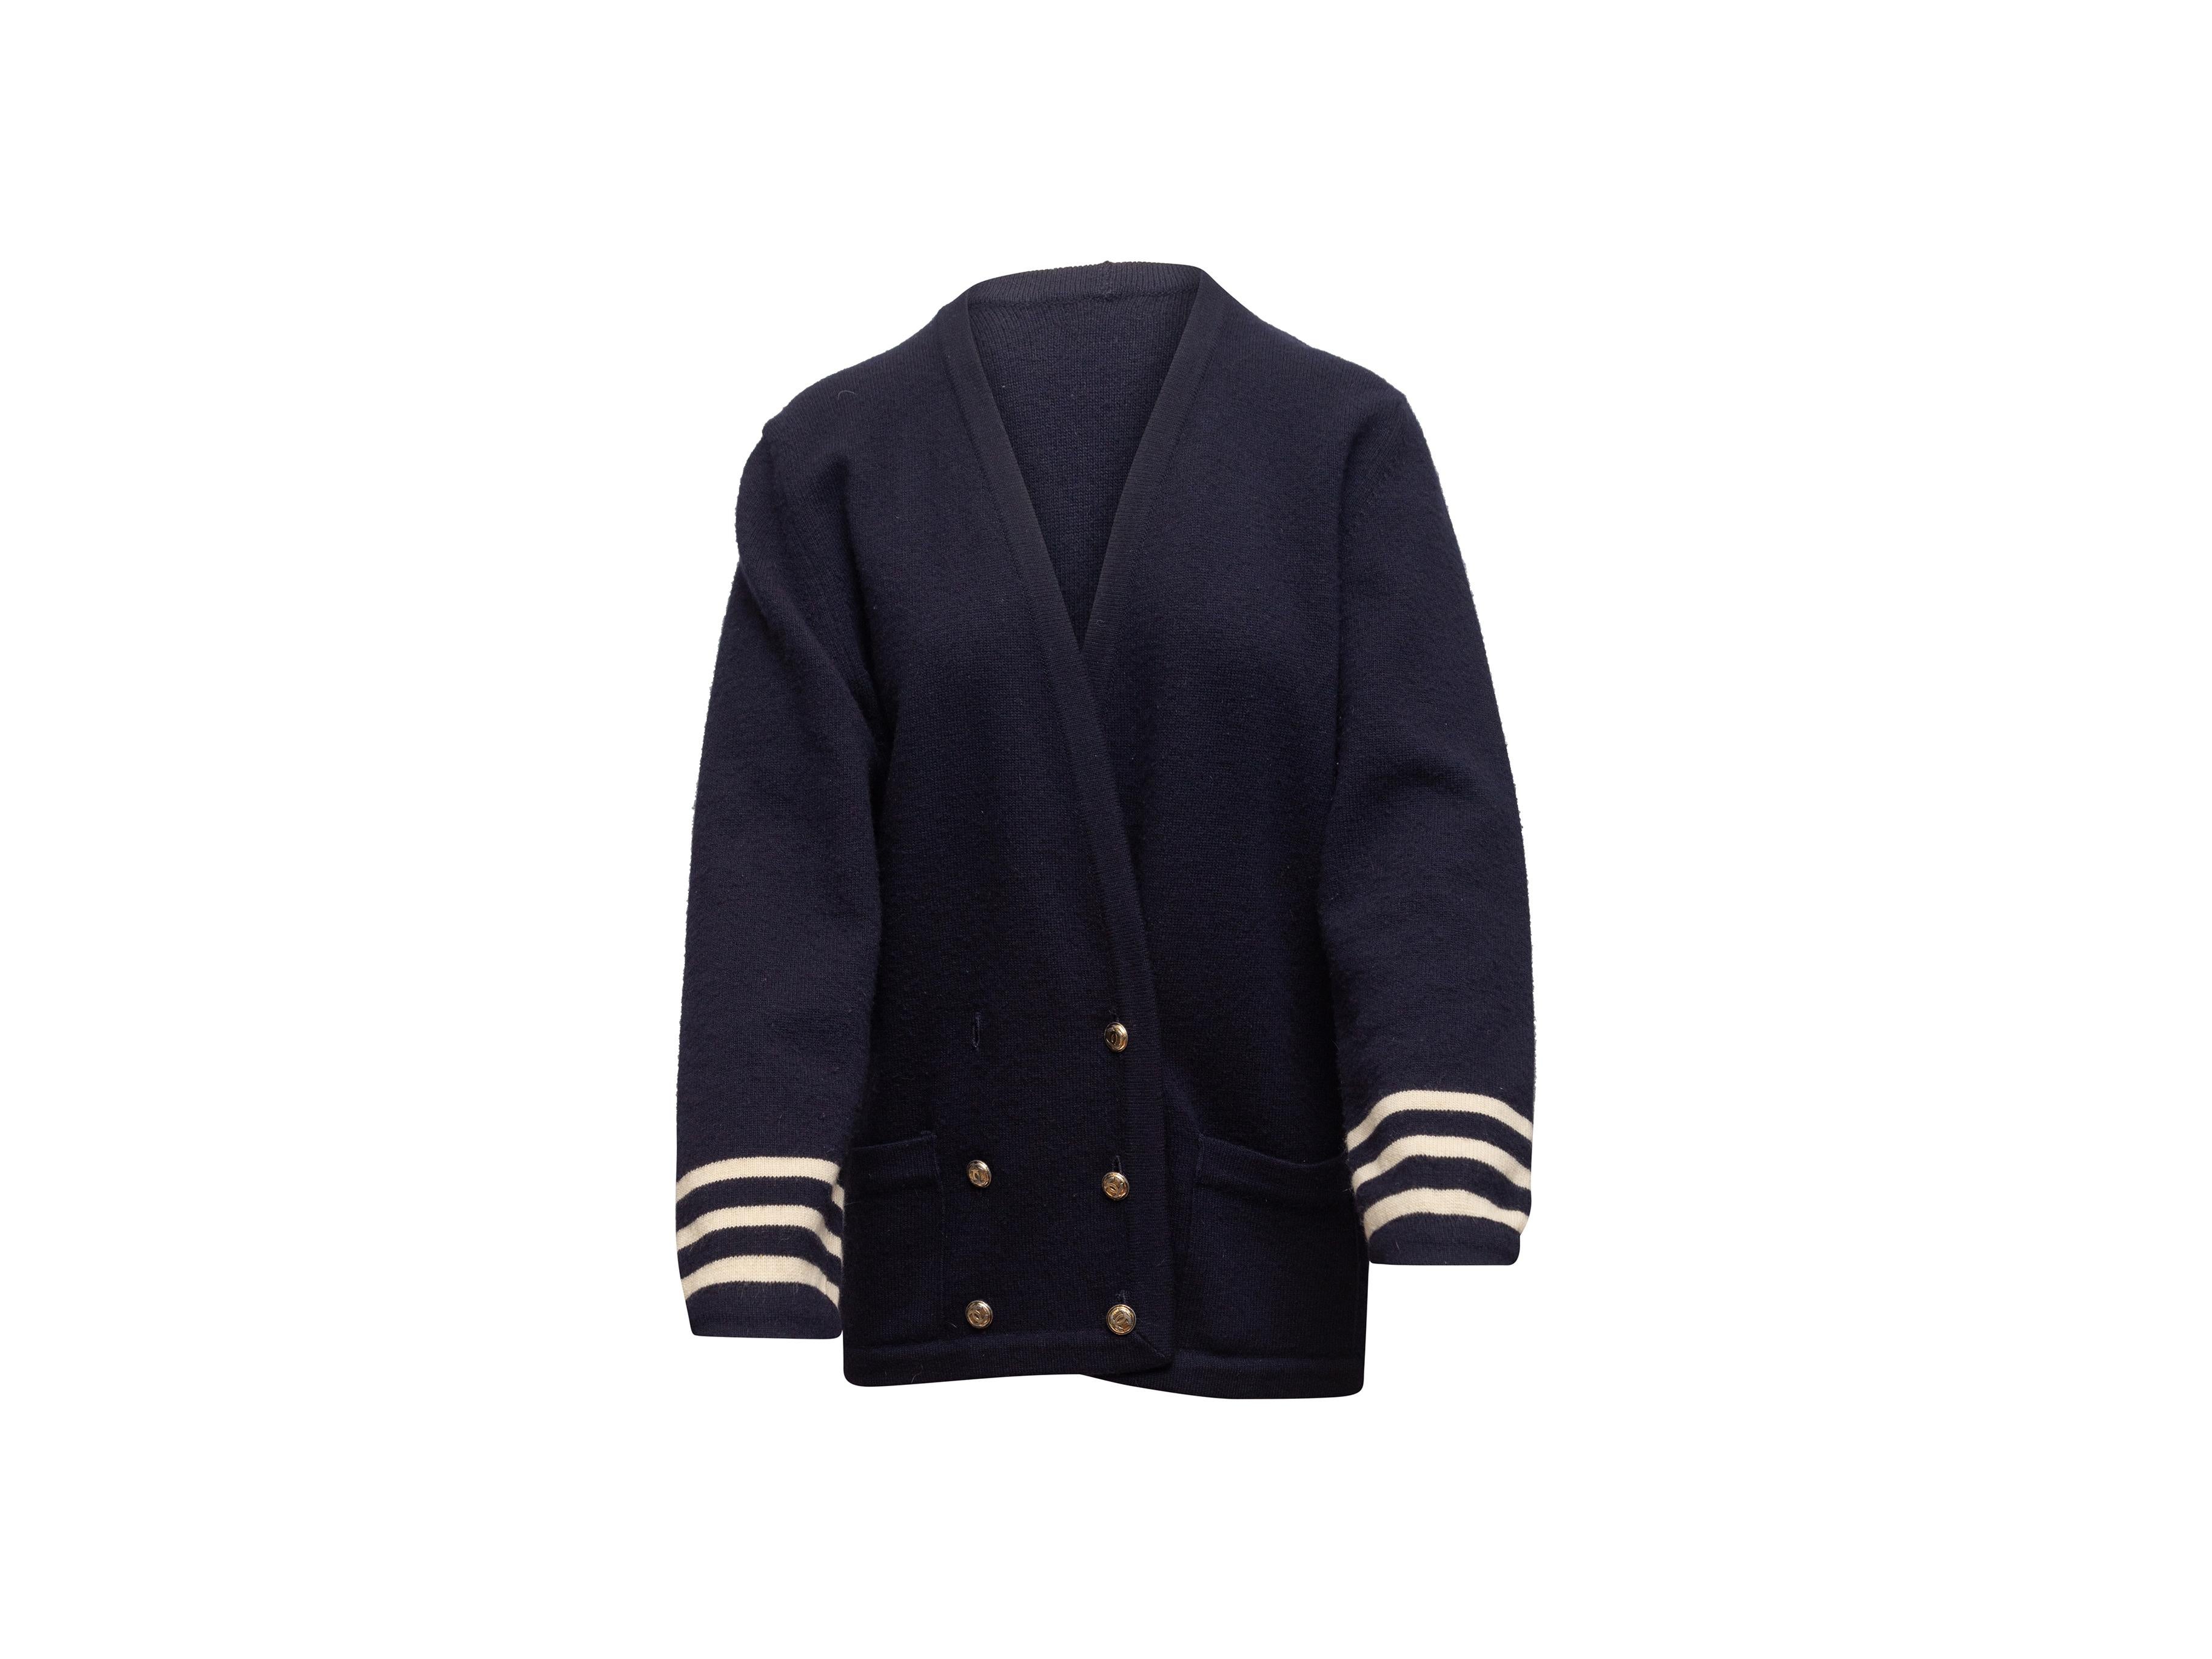 Product details: Vintage navy and white cashmere double-breasted cardigan by Chanel. V-neck. Dual hip pockets. Button closures at front. 42